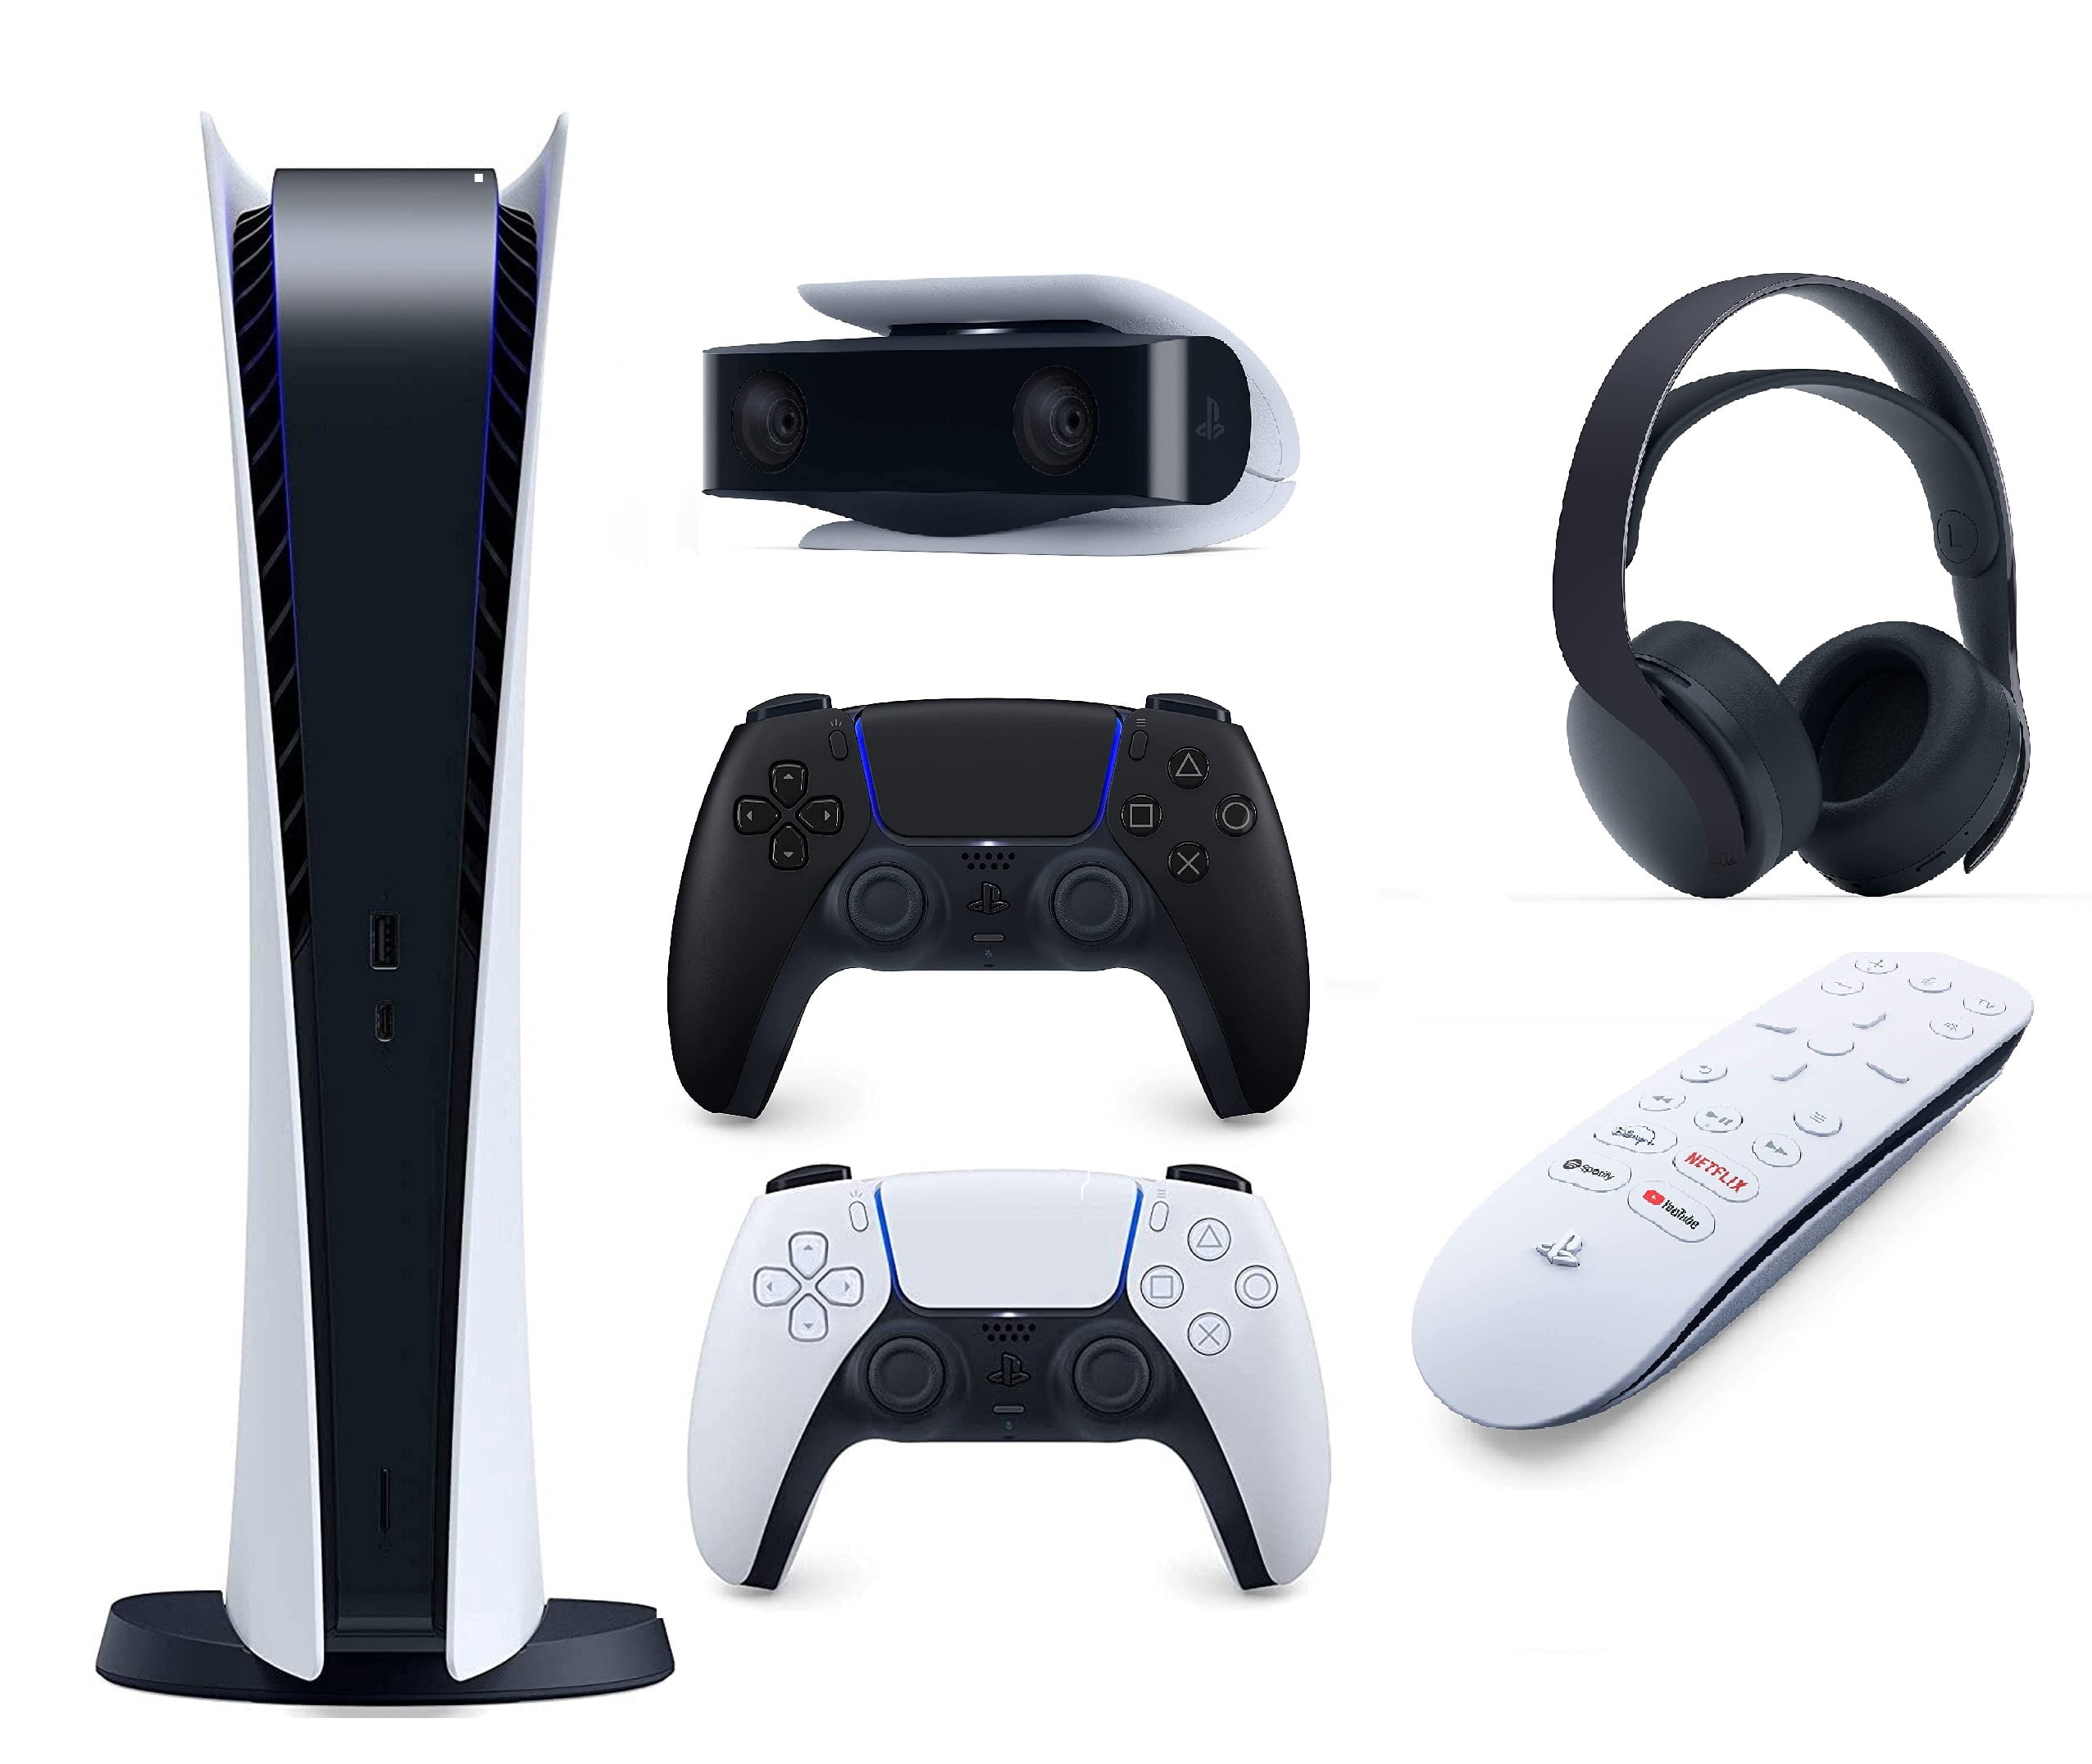 PlayStation accessories, Official PS5 controllers, audio headsets, cameras  and more